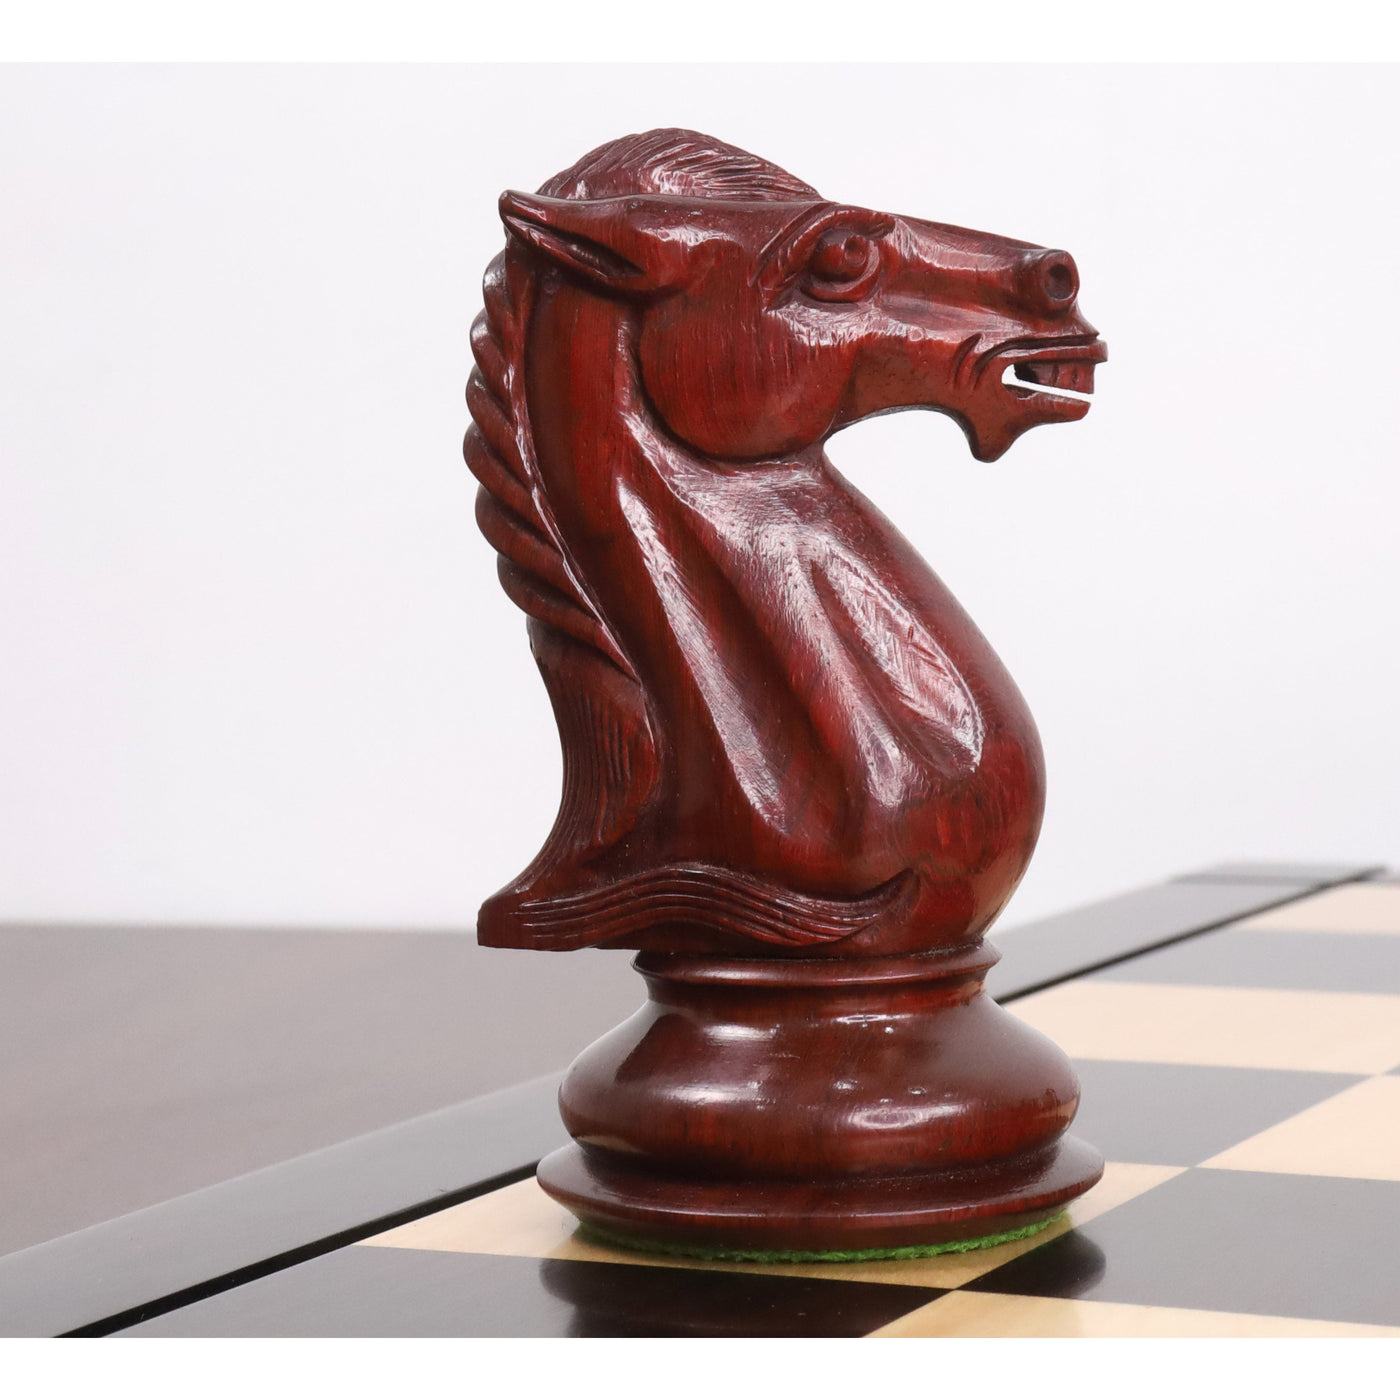 6.1" Mammoth Luxury Staunton Chess Set - Chess Pieces Only - Bud Rosewood -Triple Weight